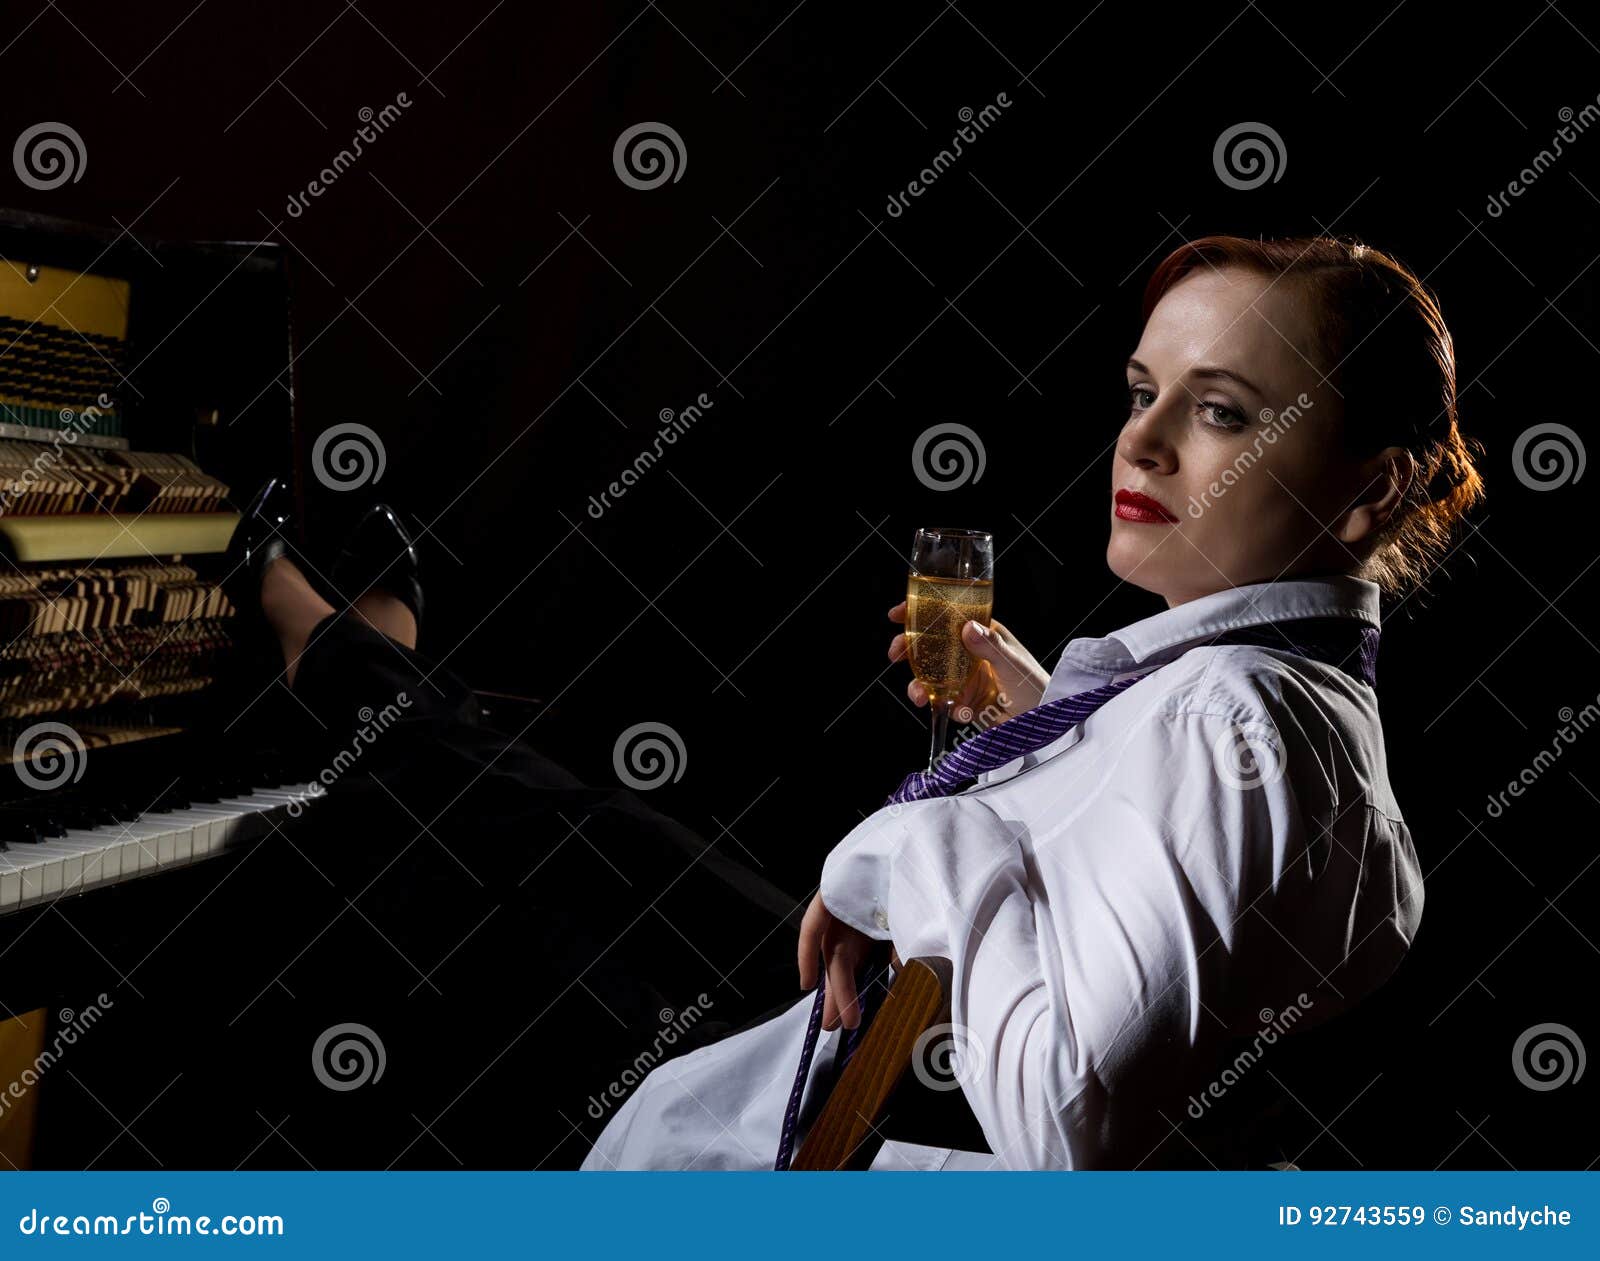 elegant woman in a white shirt and tie sitting next to the piano and drinks champagne